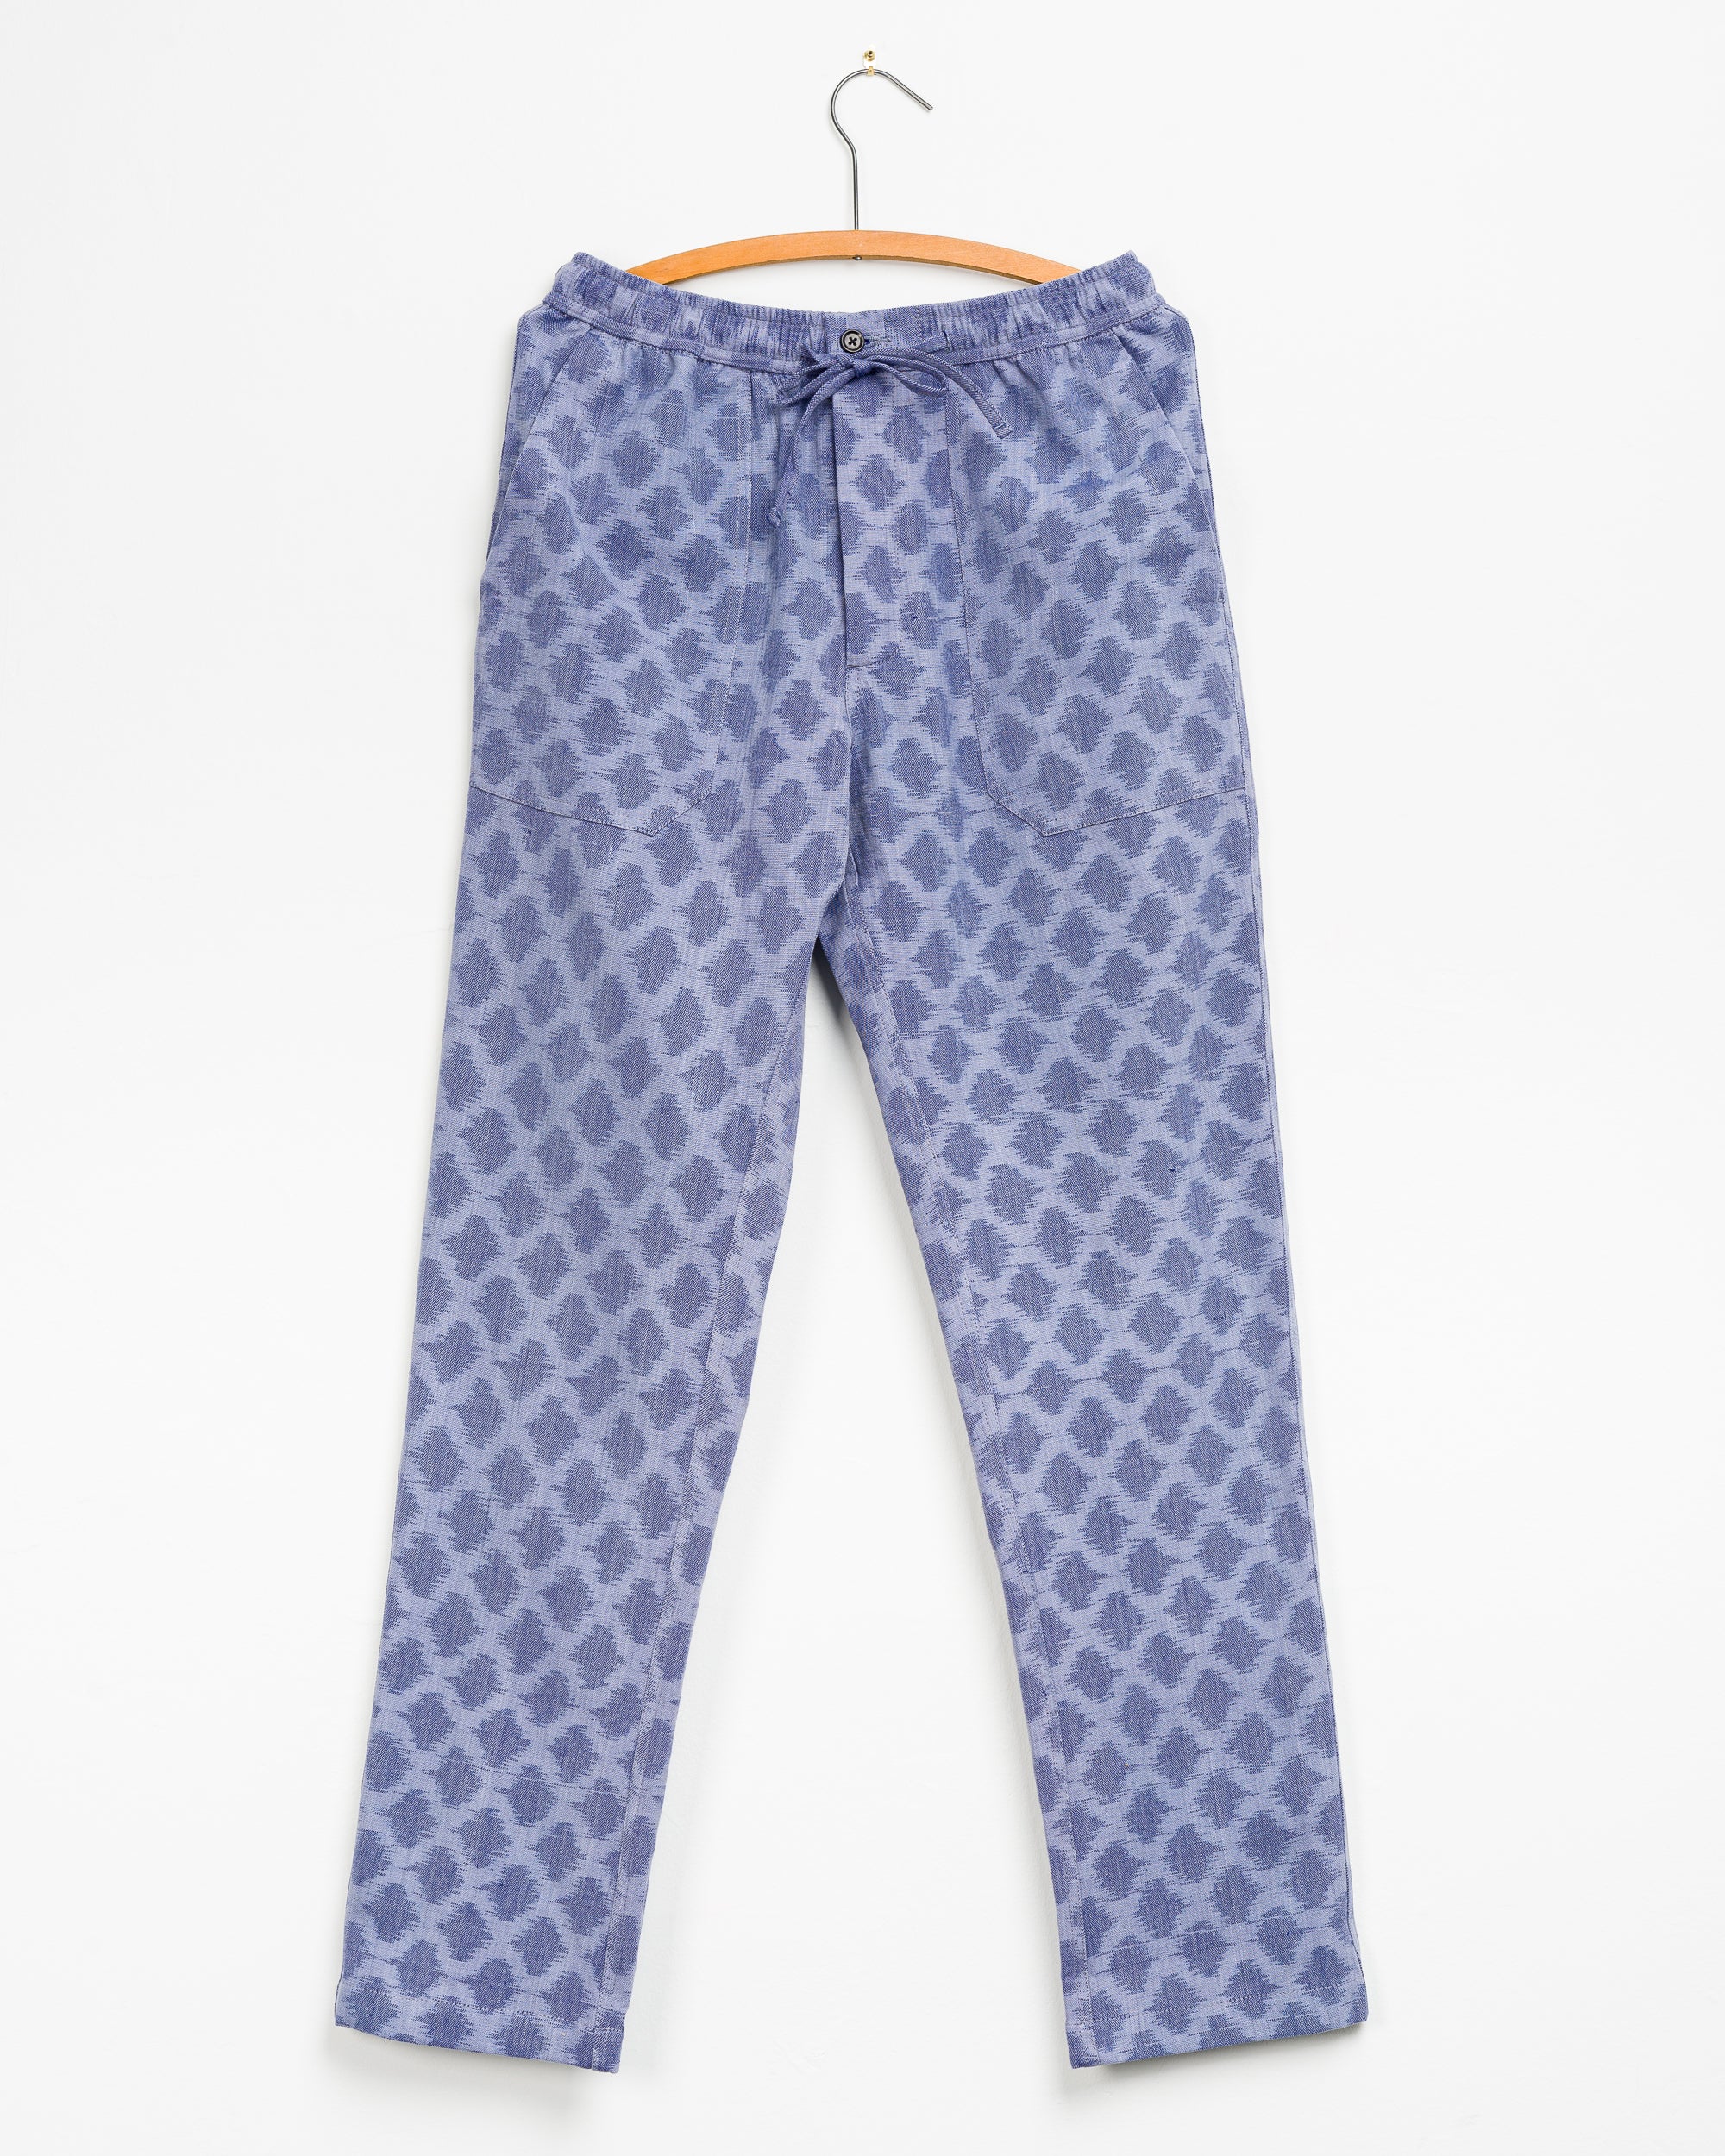 Harshad Utility Pant in Ikat